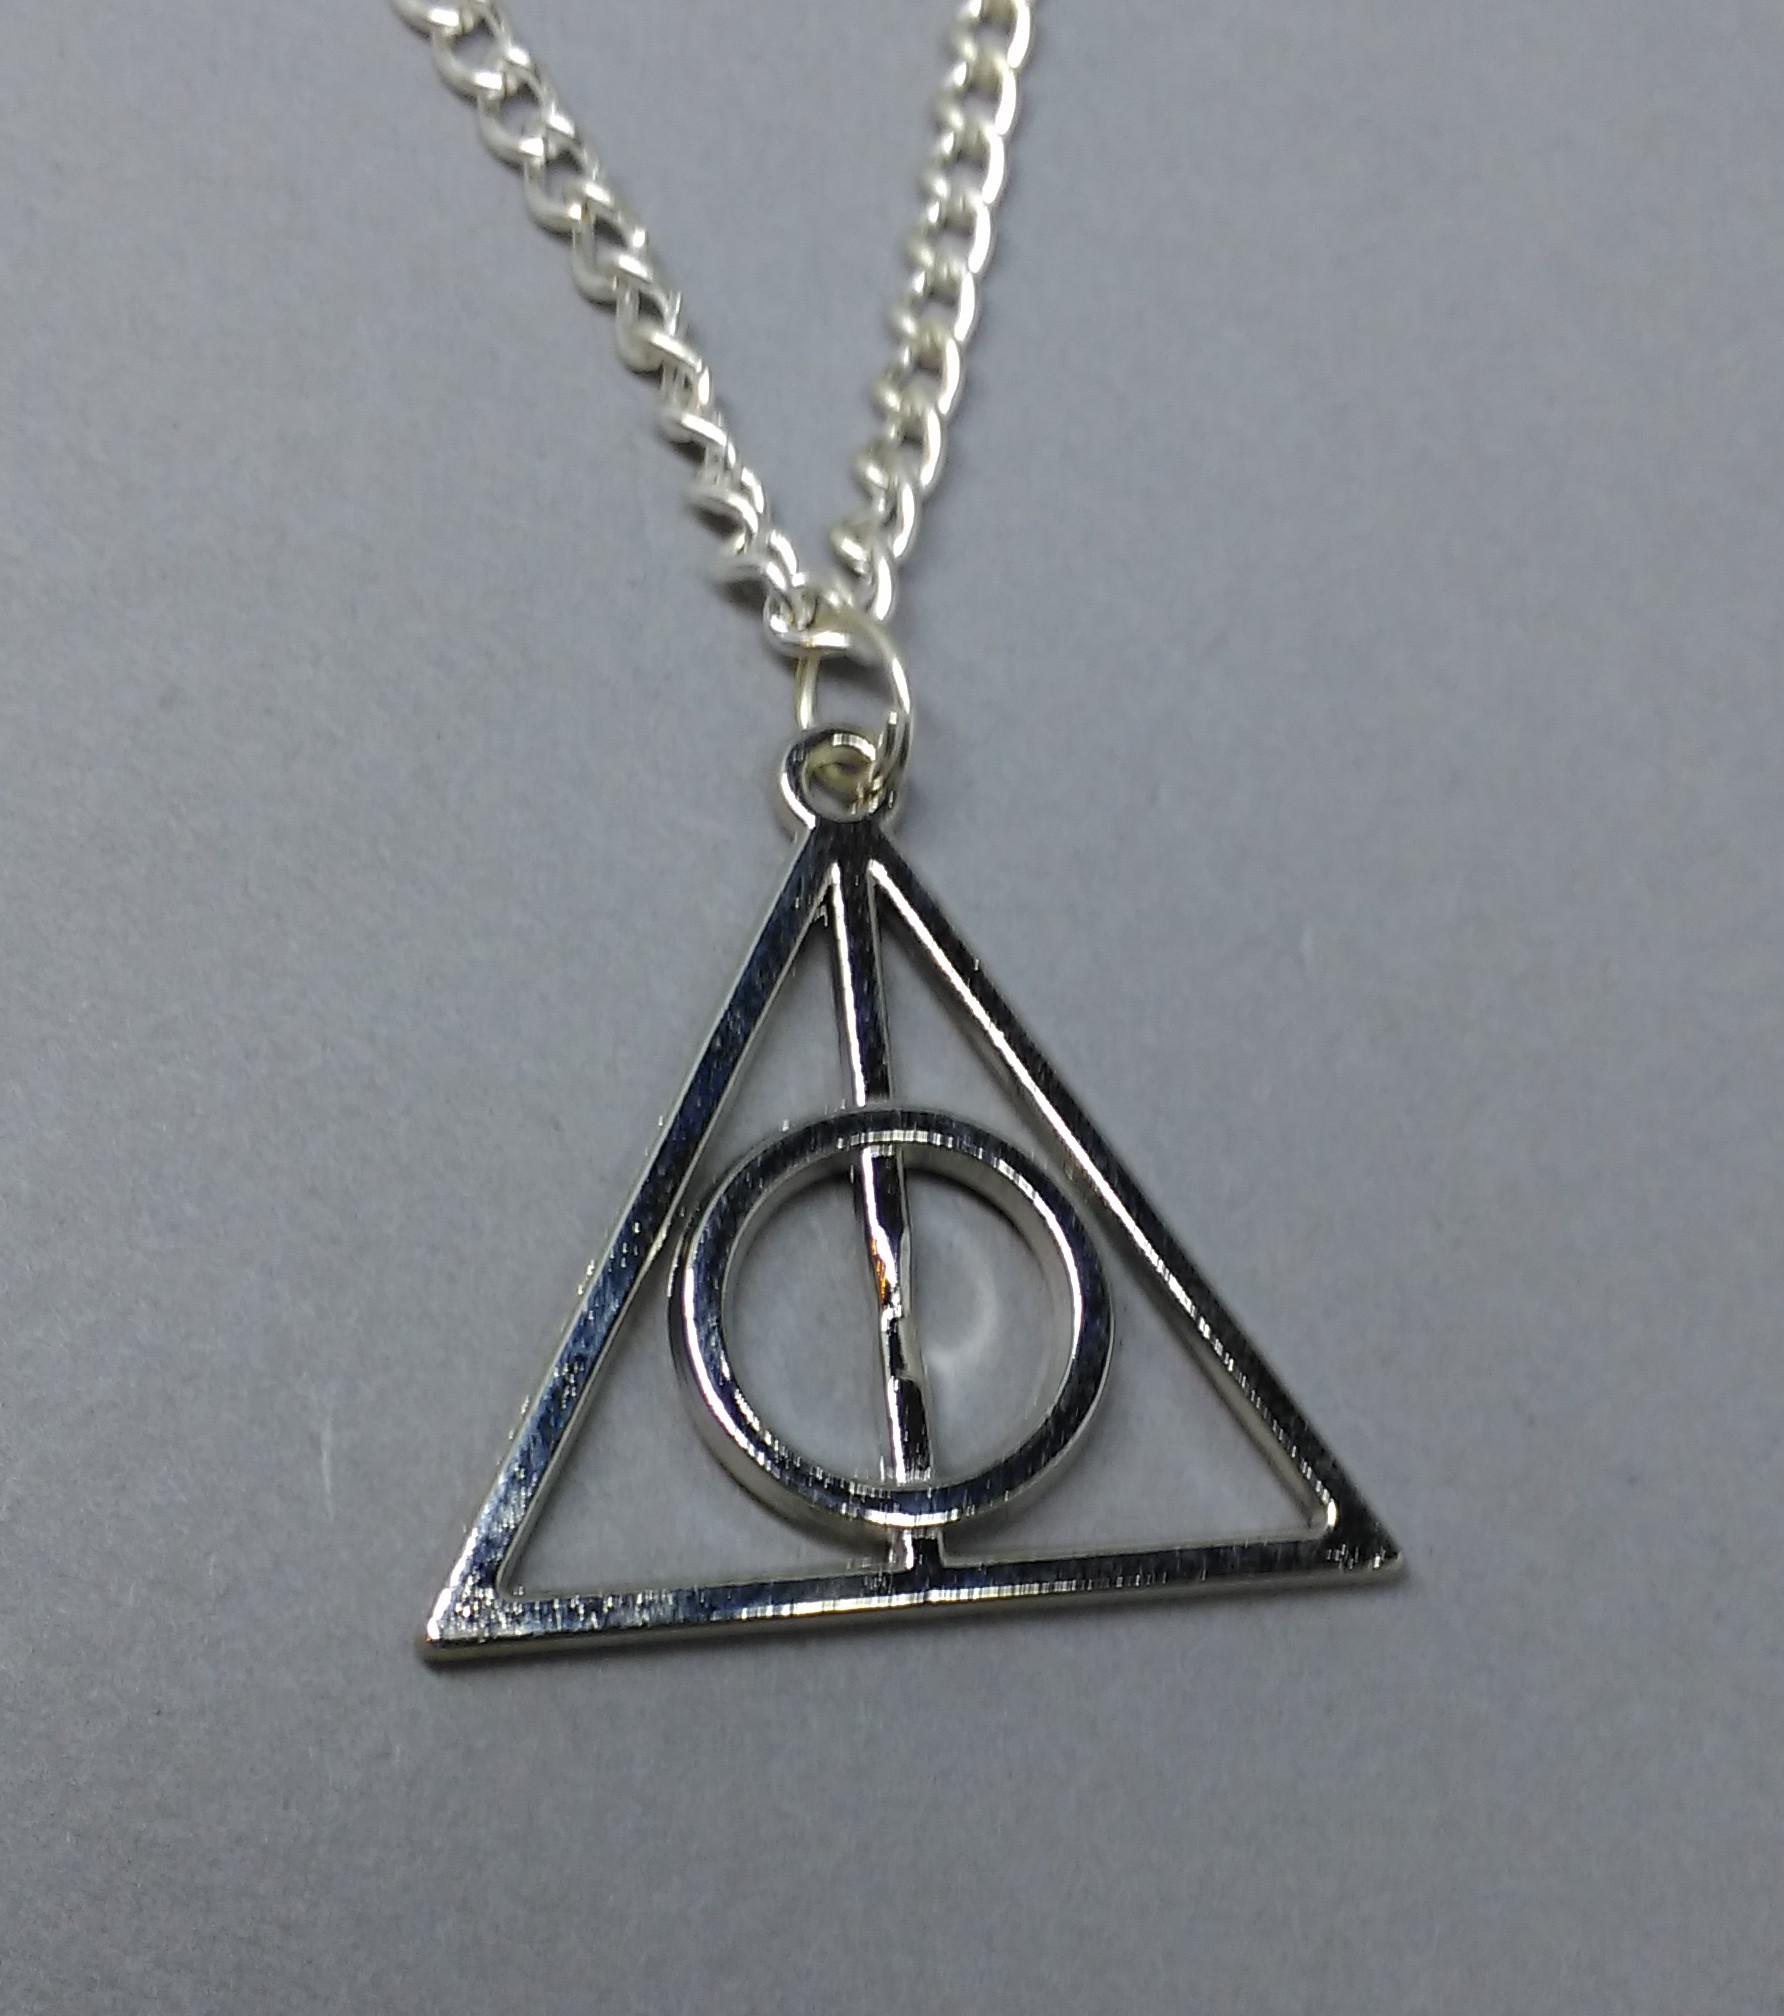 Harry Potter Deathly Hallows Necklace
 Harry Potter Deathly Hallows Necklace on Storenvy